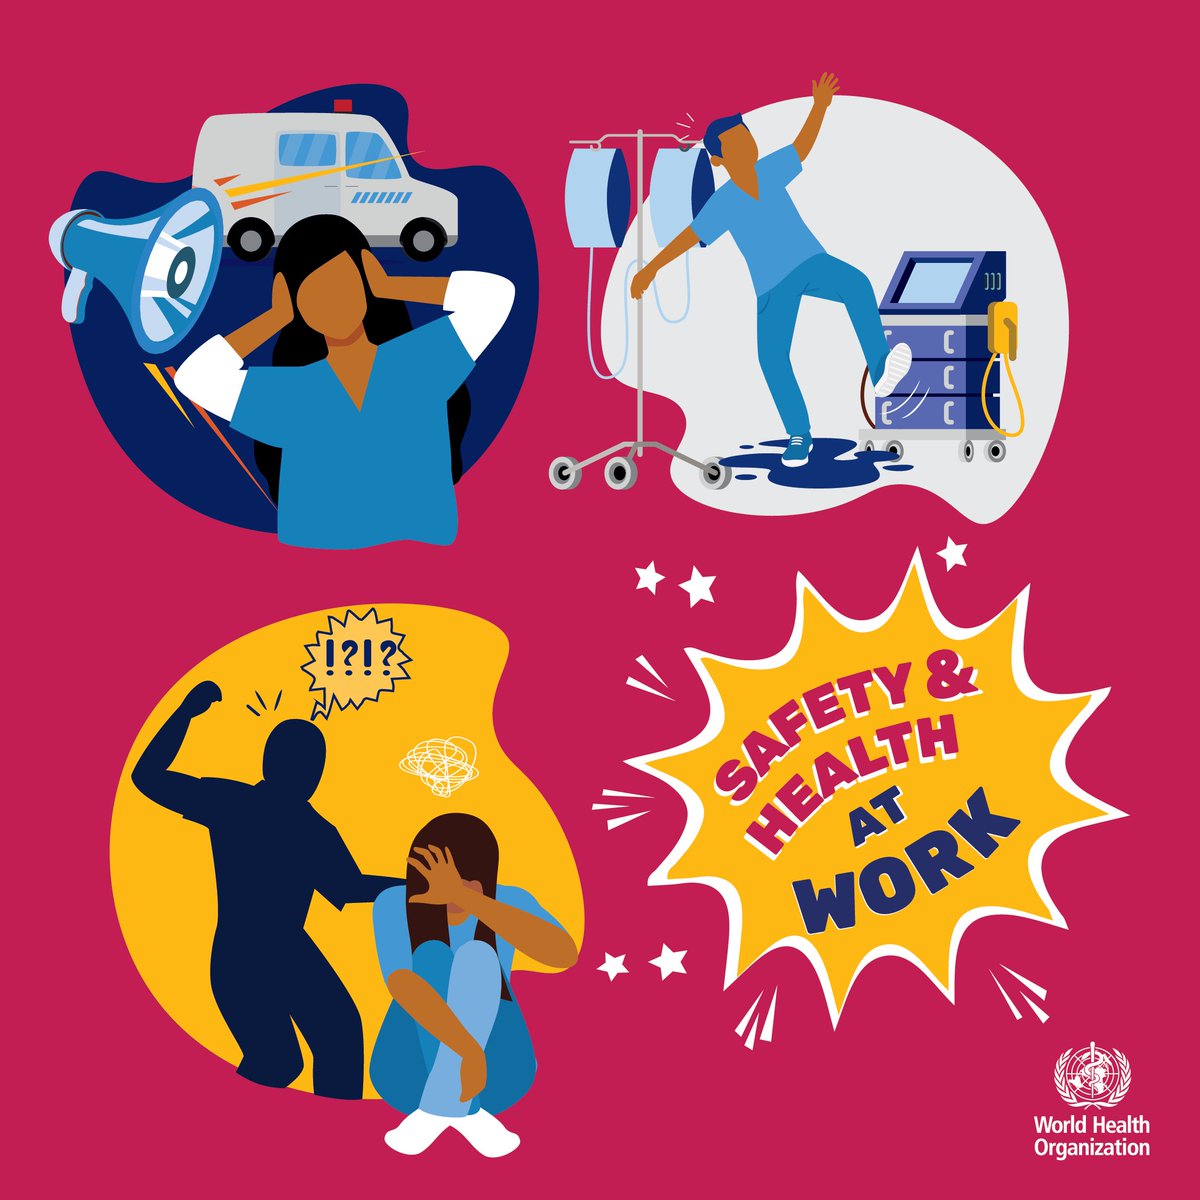 Health & care workers have a right to safety & protection from:
➡️Occupational infections
➡️Unsafe patient handling
➡️Hazardous chemicals
➡️Radiation
➡️Stress, burnout, fatigue
➡️Violence
➡️Risks in the work environment
➡️Occupational injuries

#SafeDay